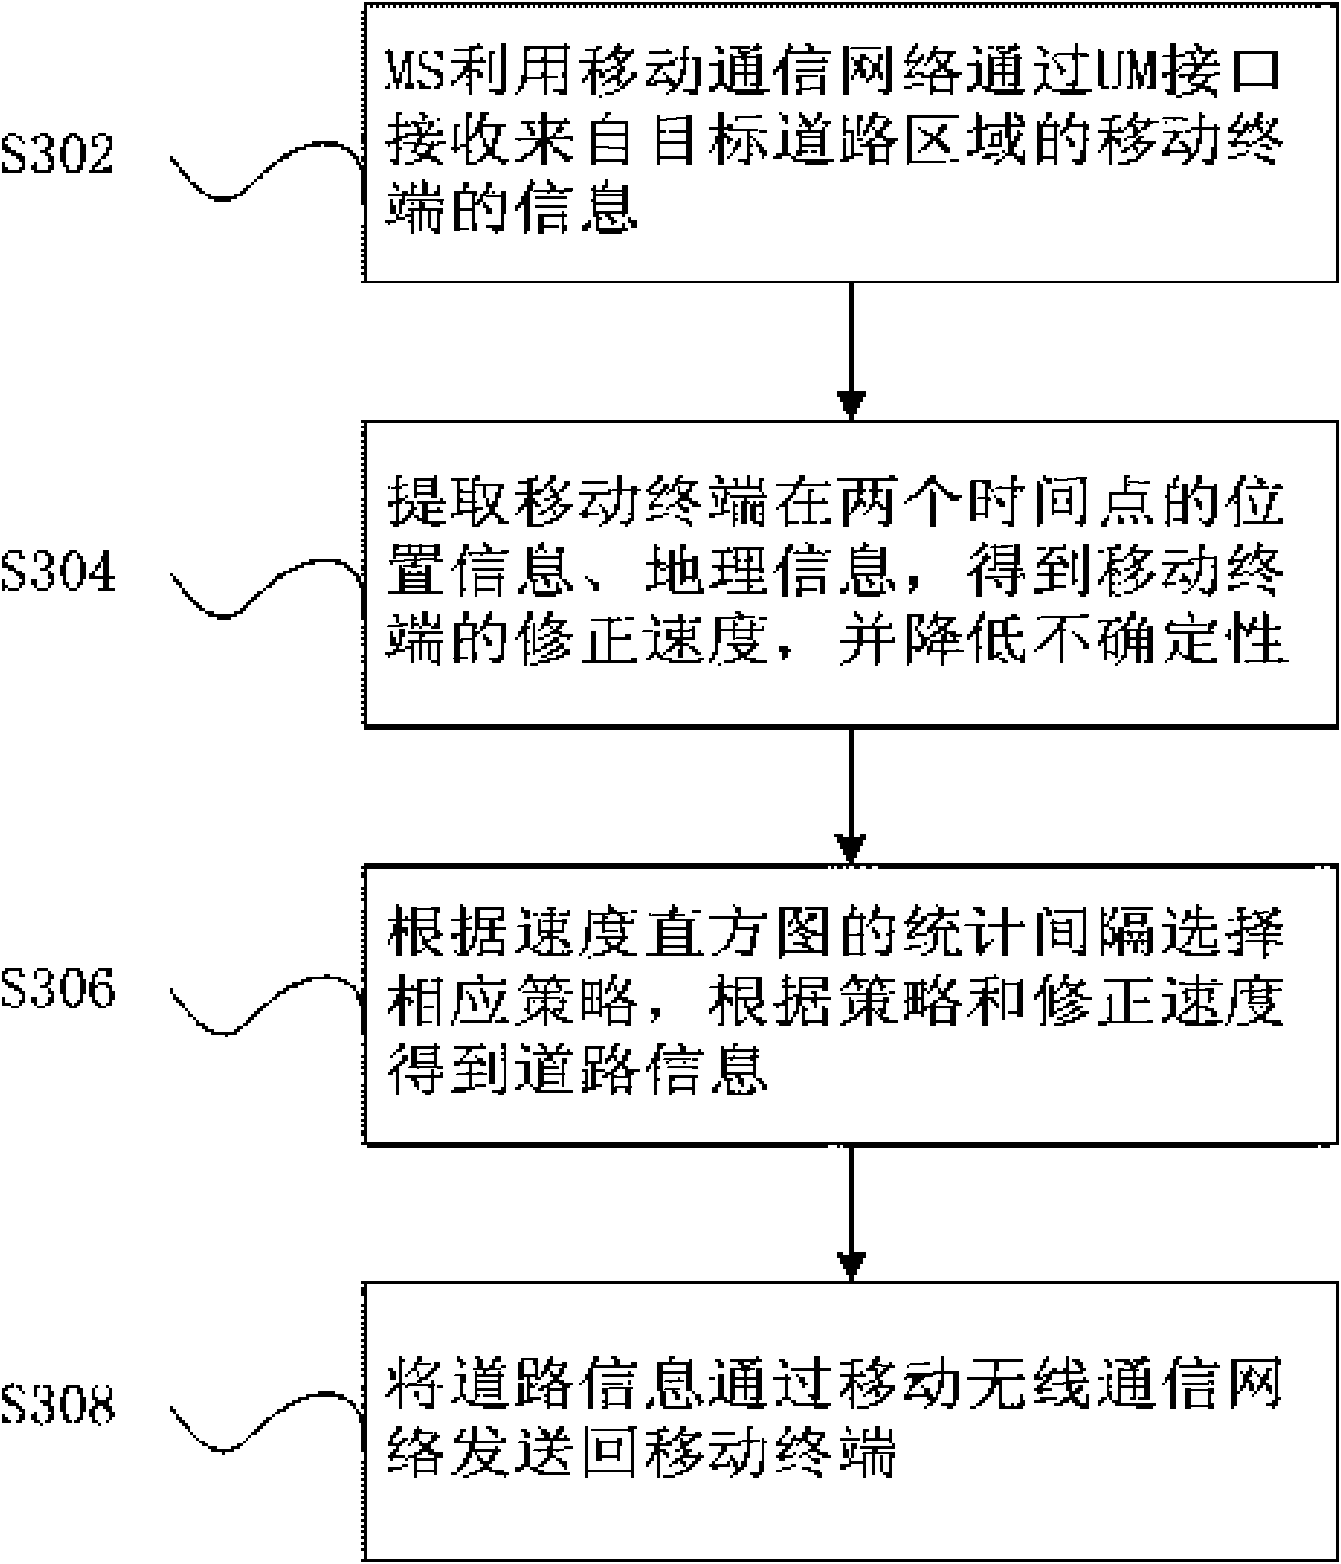 Method and system for obtaining road information by mobile communication network